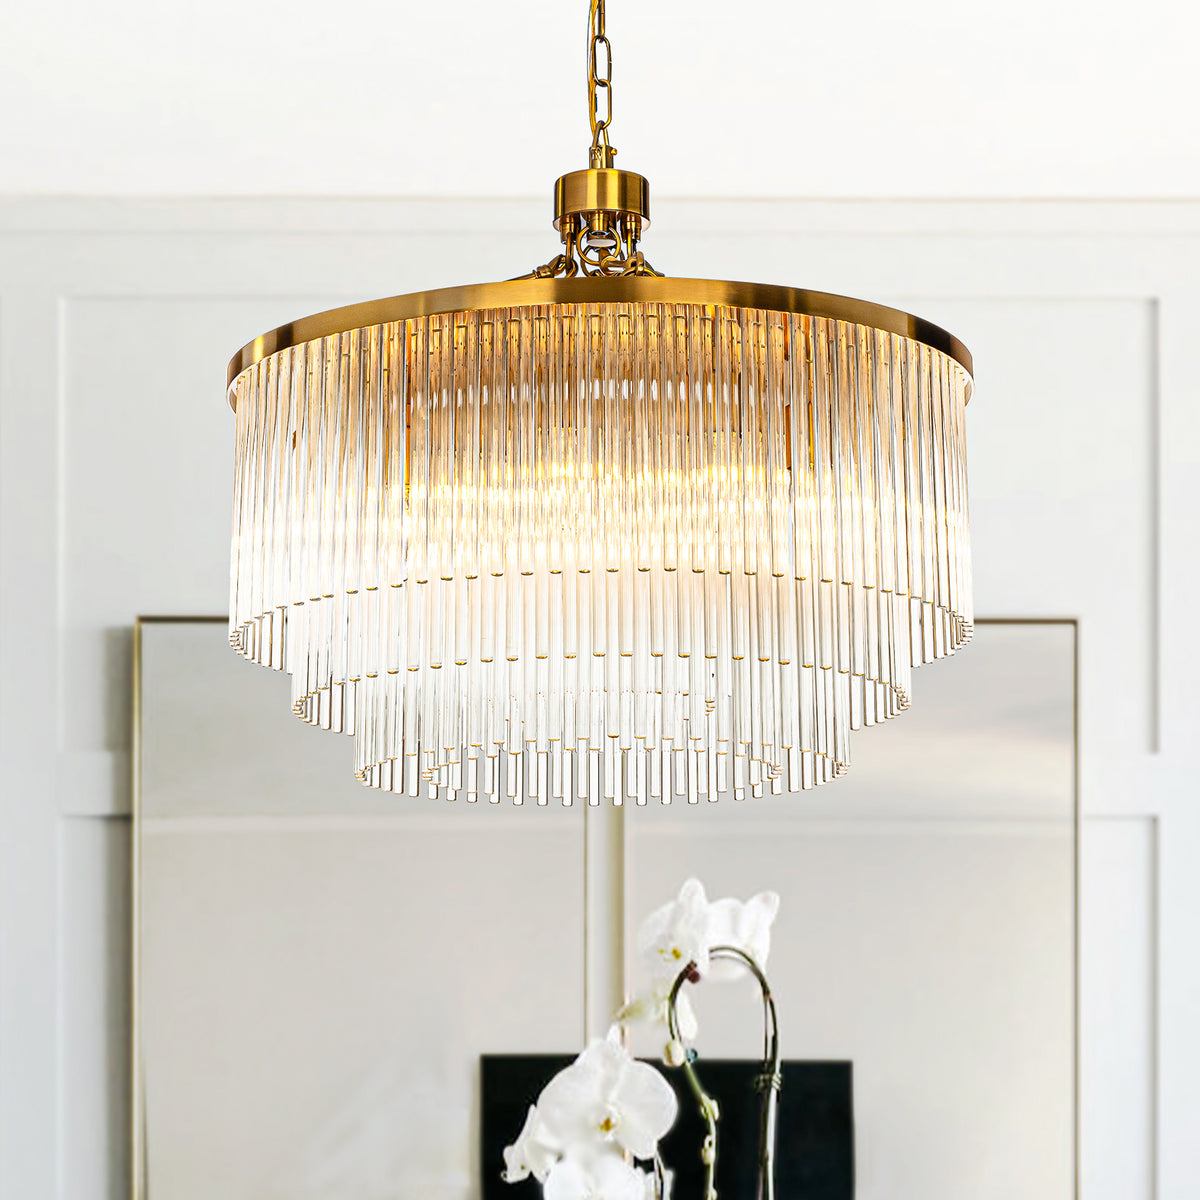 Mid-century Modern 8-Lights 3-Tier Glam Antique Brass Round Glass Fringe Chandelier With Clear Glass Rods